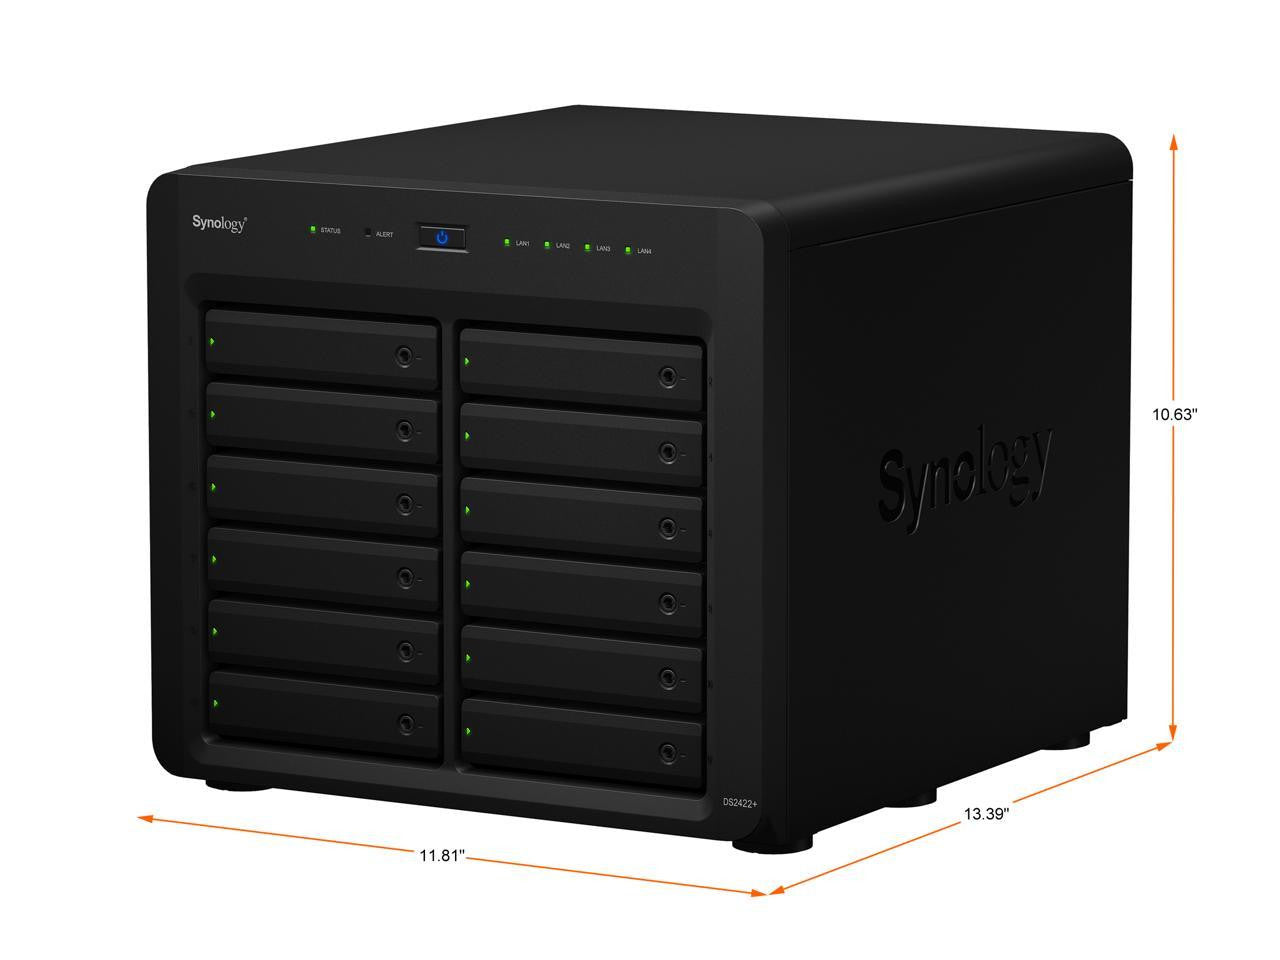 Synology DS2422+ Quad Core 2.2Ghz 12-Bay NAS with E10M20 10GbE Port and 1.6TB (2x800GB) CACHE, 8GB RAM and 144TB (12 x 12TB) of Synology Enterprise Drives